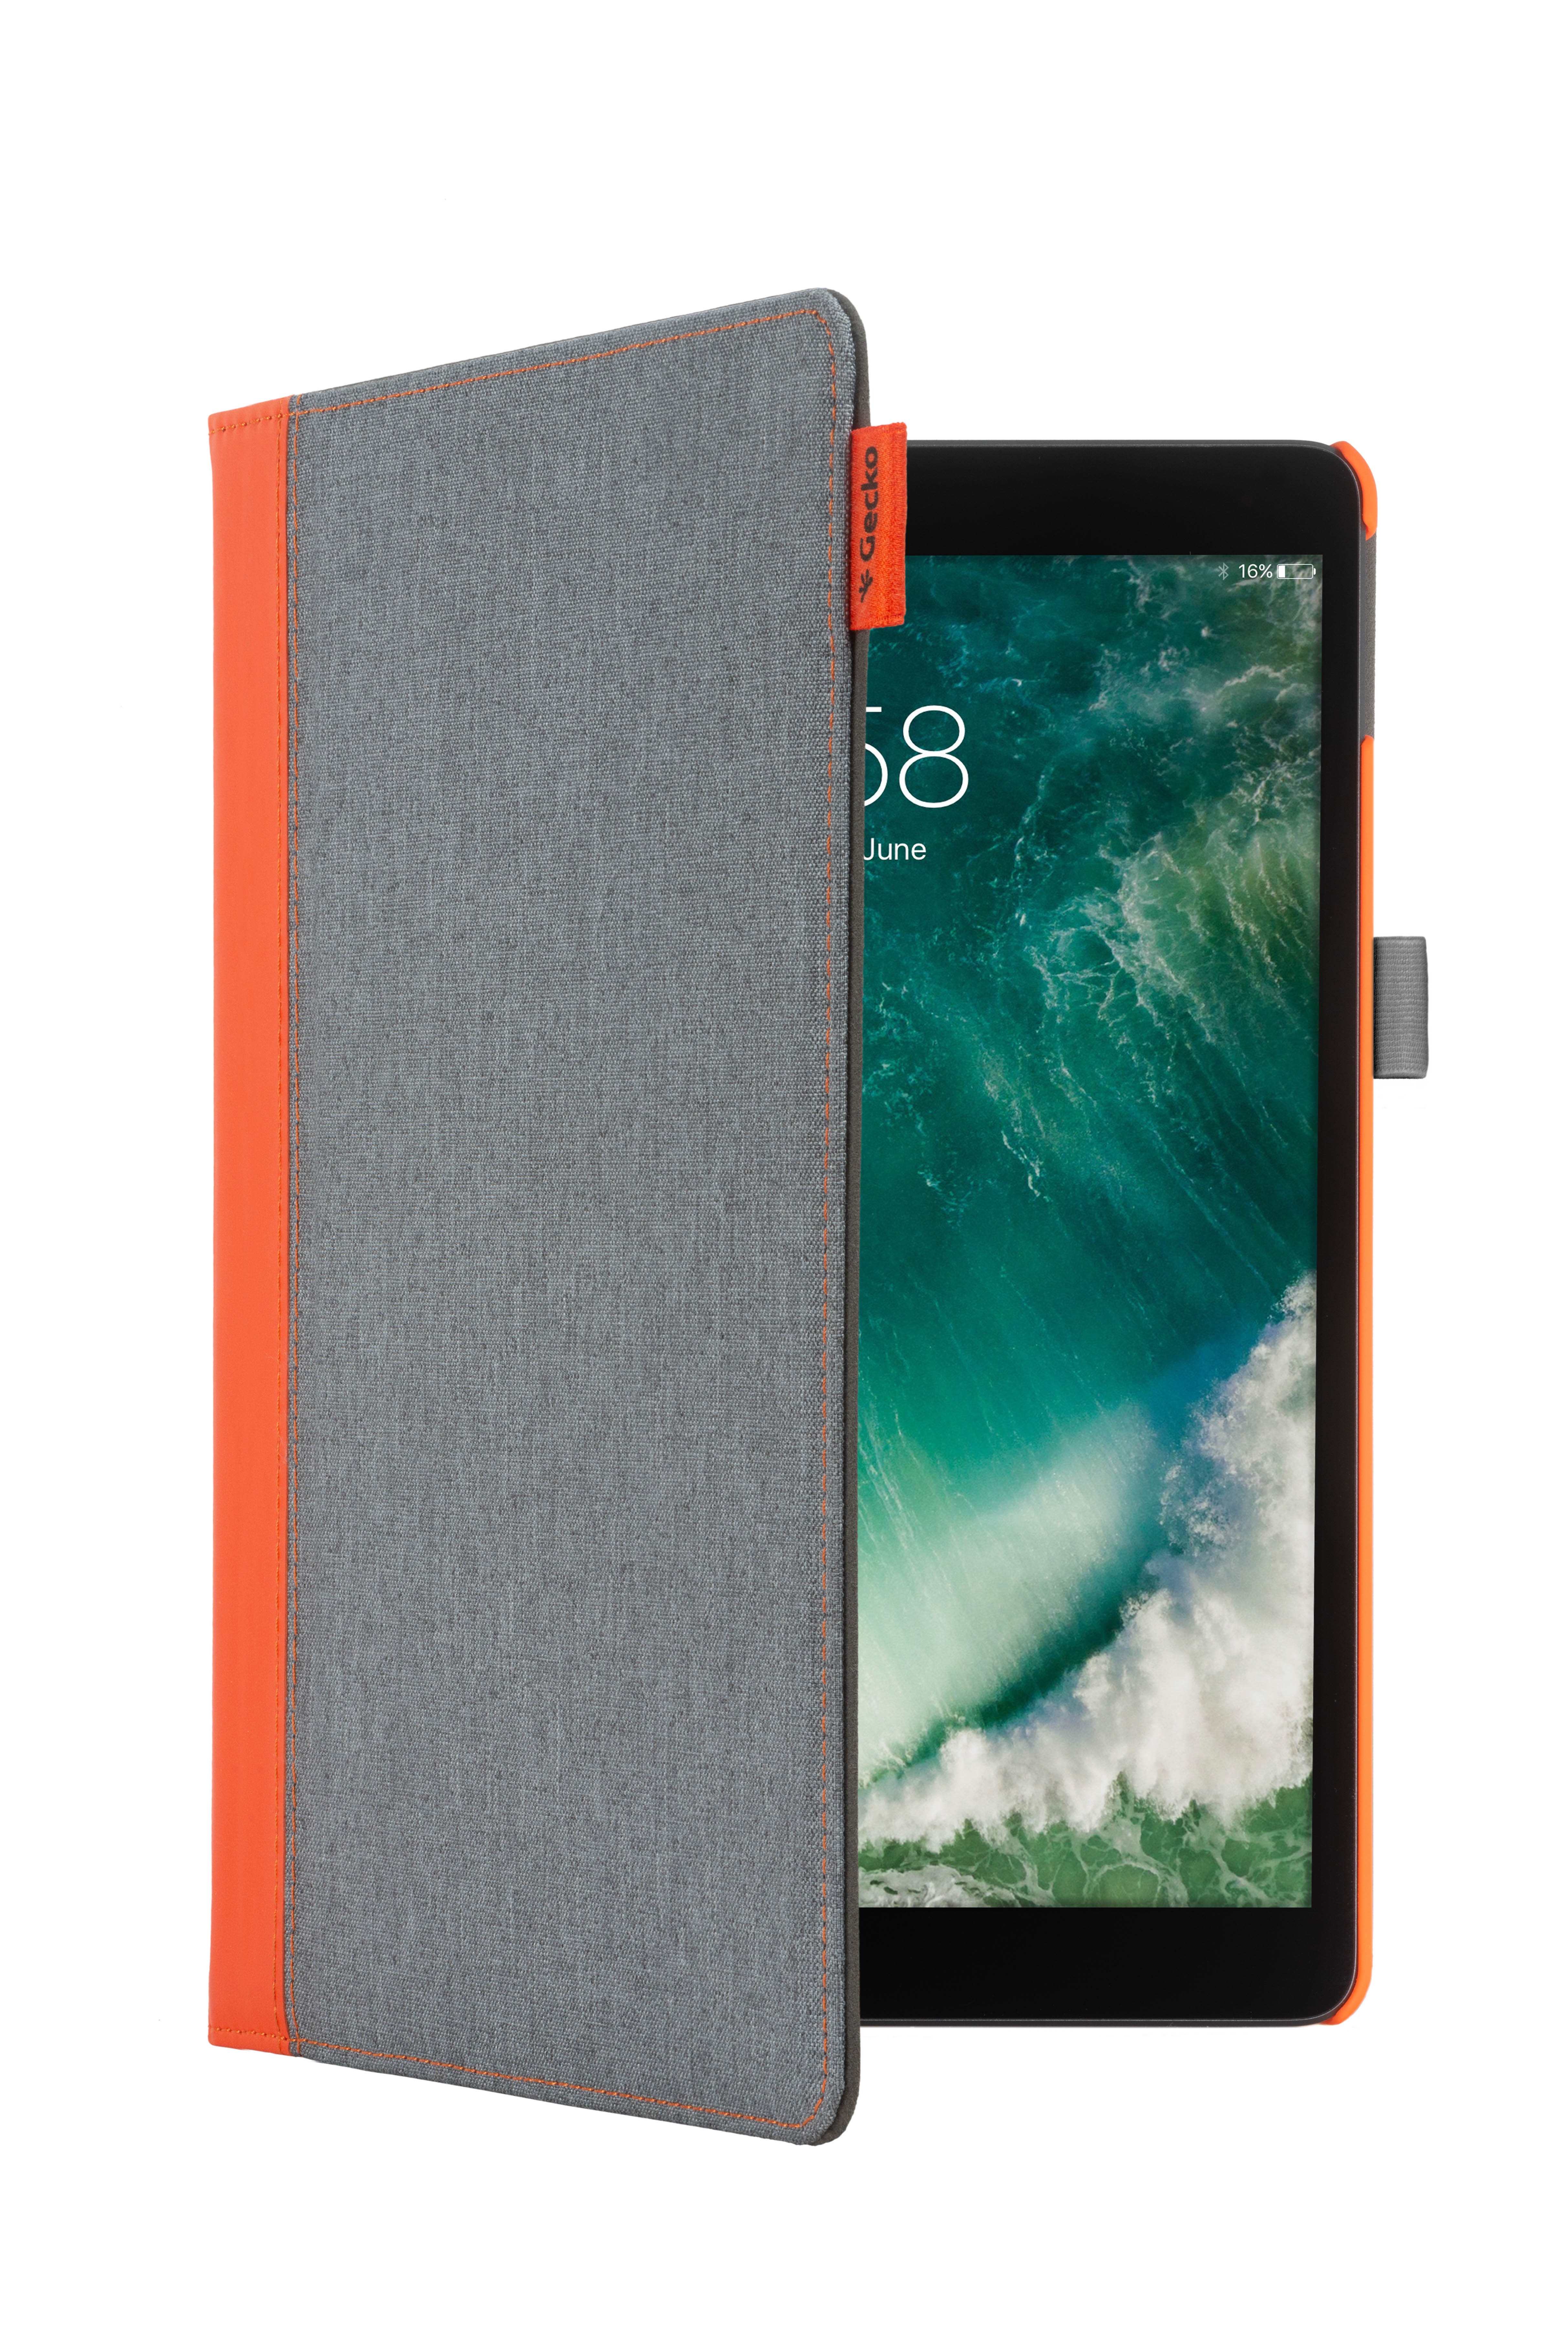 Easy-Click COVERS Hülle iPad Bookcover Air Tablet Cover Pro (2017) GECKO PU 10.5 iPad Leather, für (2019),Apple Apple Grau,Orange